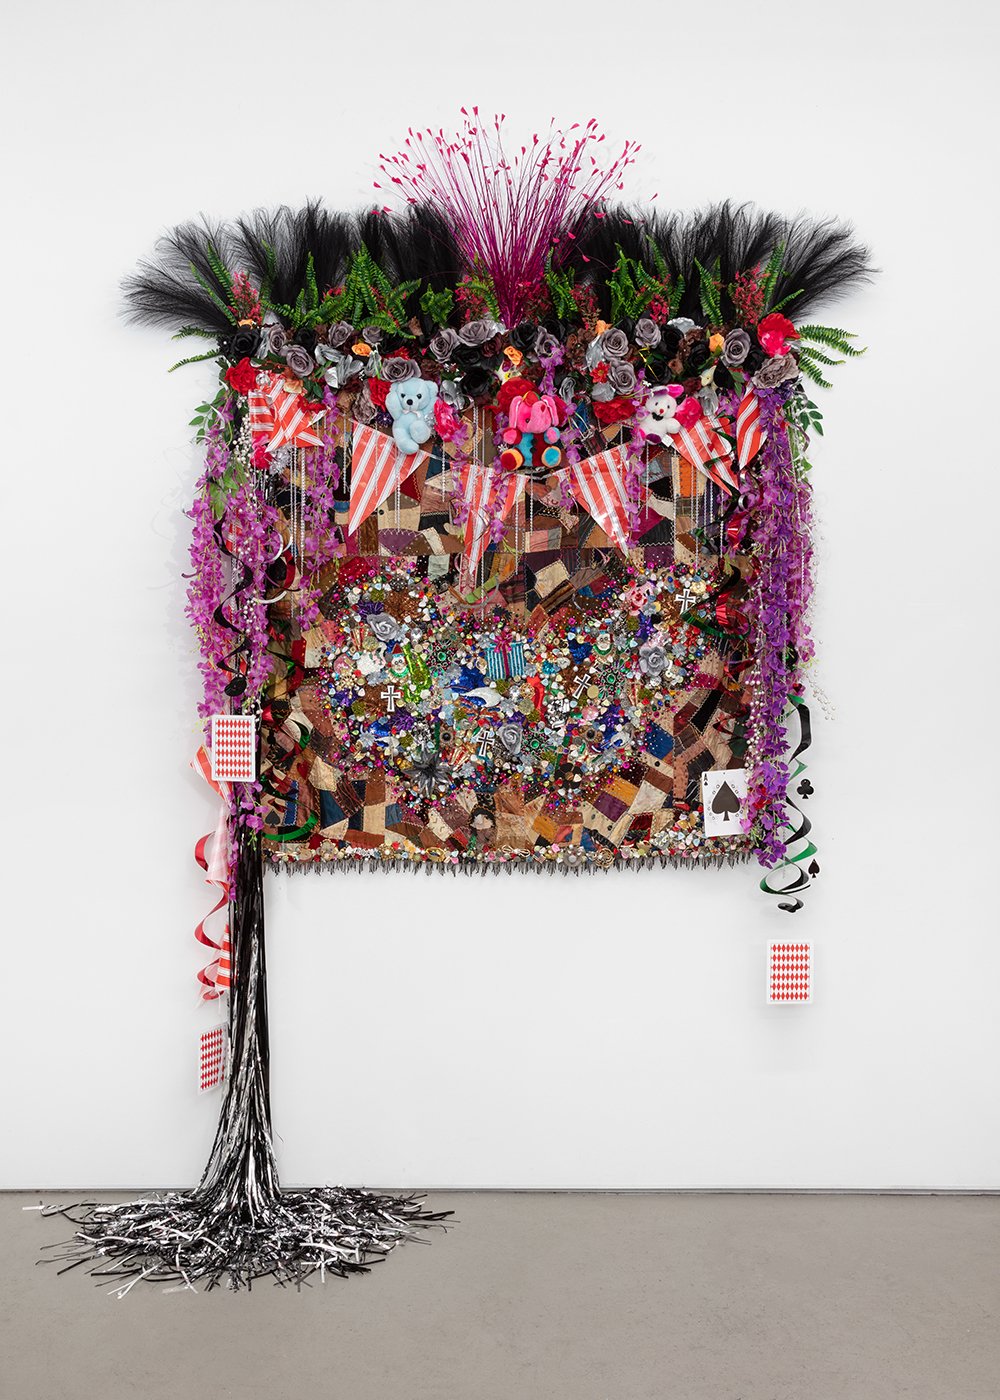   Shroud #10 , 2022, Found ‘Crazy’ quilt ca. 1890, trim, fabric flowers, streamers, banners, garland, metal chain, toys, ribbon, costume jewelry, buttons, plastic flowers and fauna, beads, sequins, thread, fabric, Douglas fir, 108 x 76 x 26” 